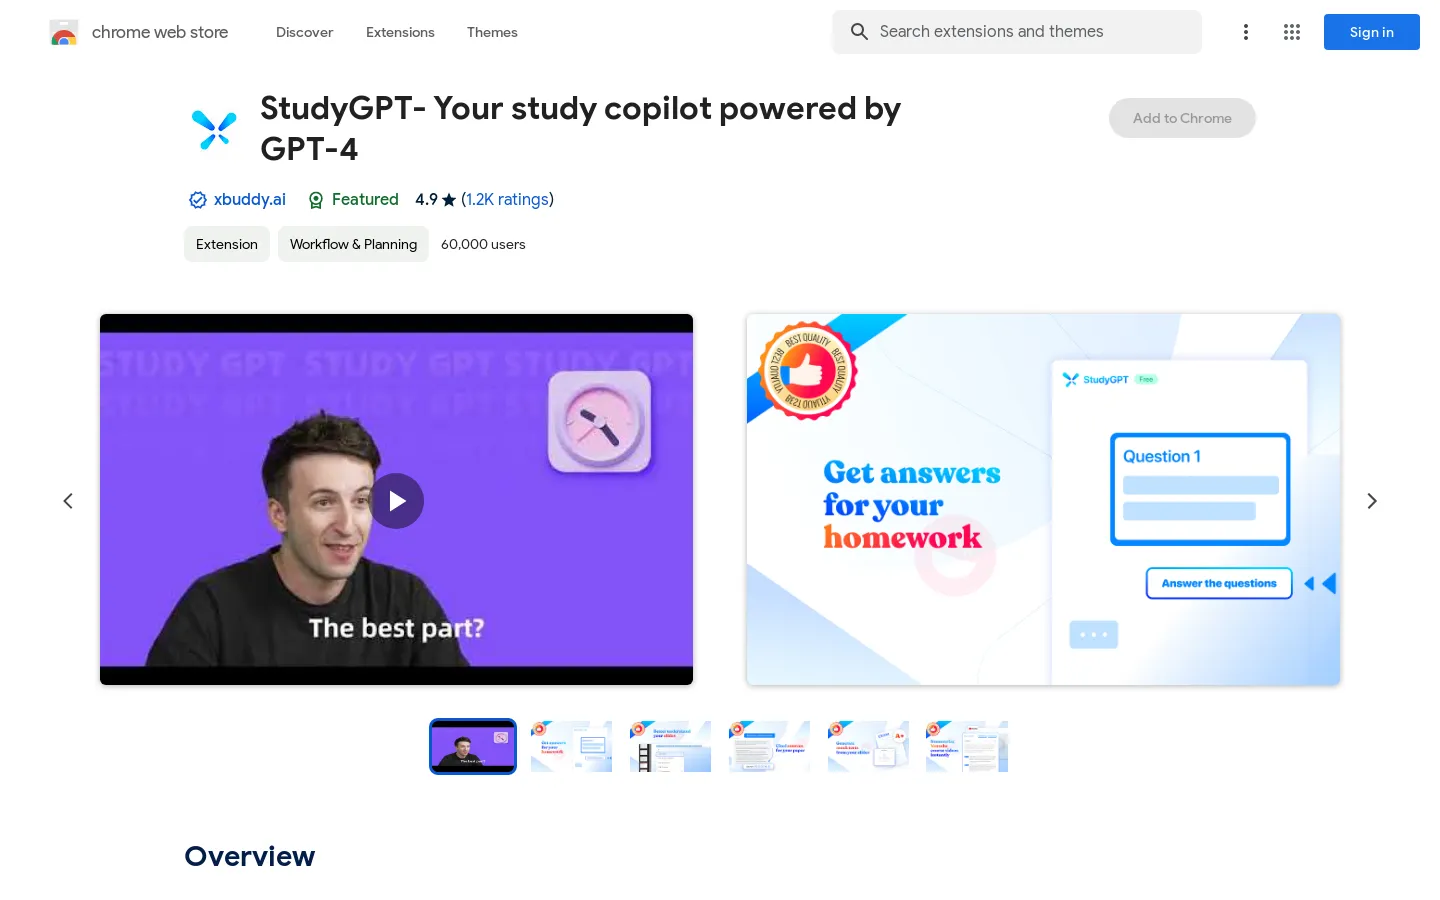 StudyGPT- Your study copilot powered by GPT-4